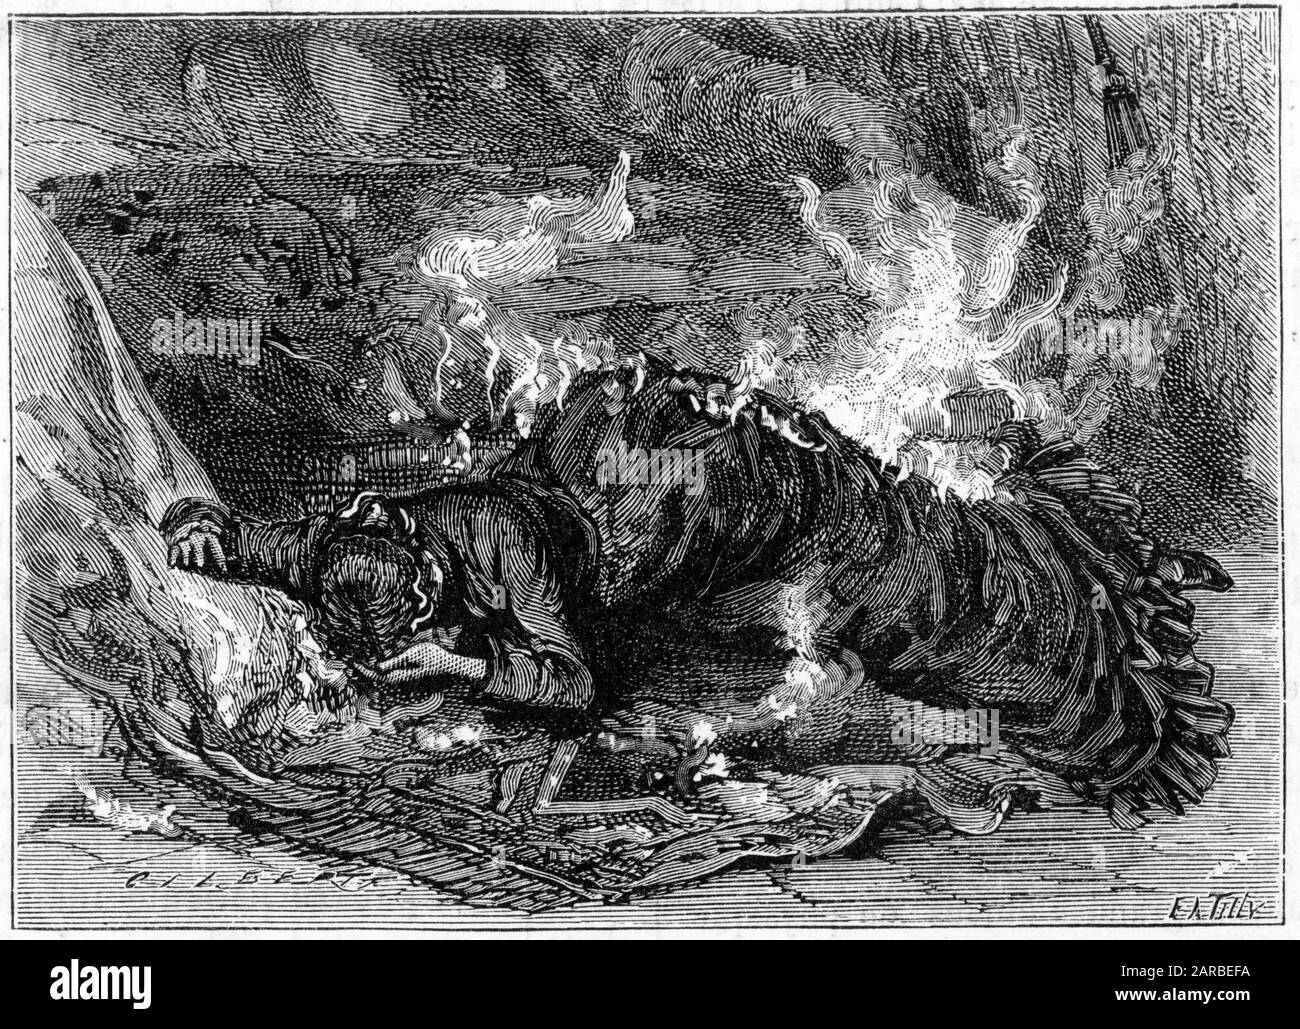 Figure 2 of 2. Terrible accident - Lady ablaze, her dress has caught fire and she has fallen to the ground unconscious. This illustration shows that if one lies down horizontally, when the fire has taken to her clothes, the flames, instead of surrounding the body, occur only superficially and with less intensity....     Date: 1886 Stock Photo